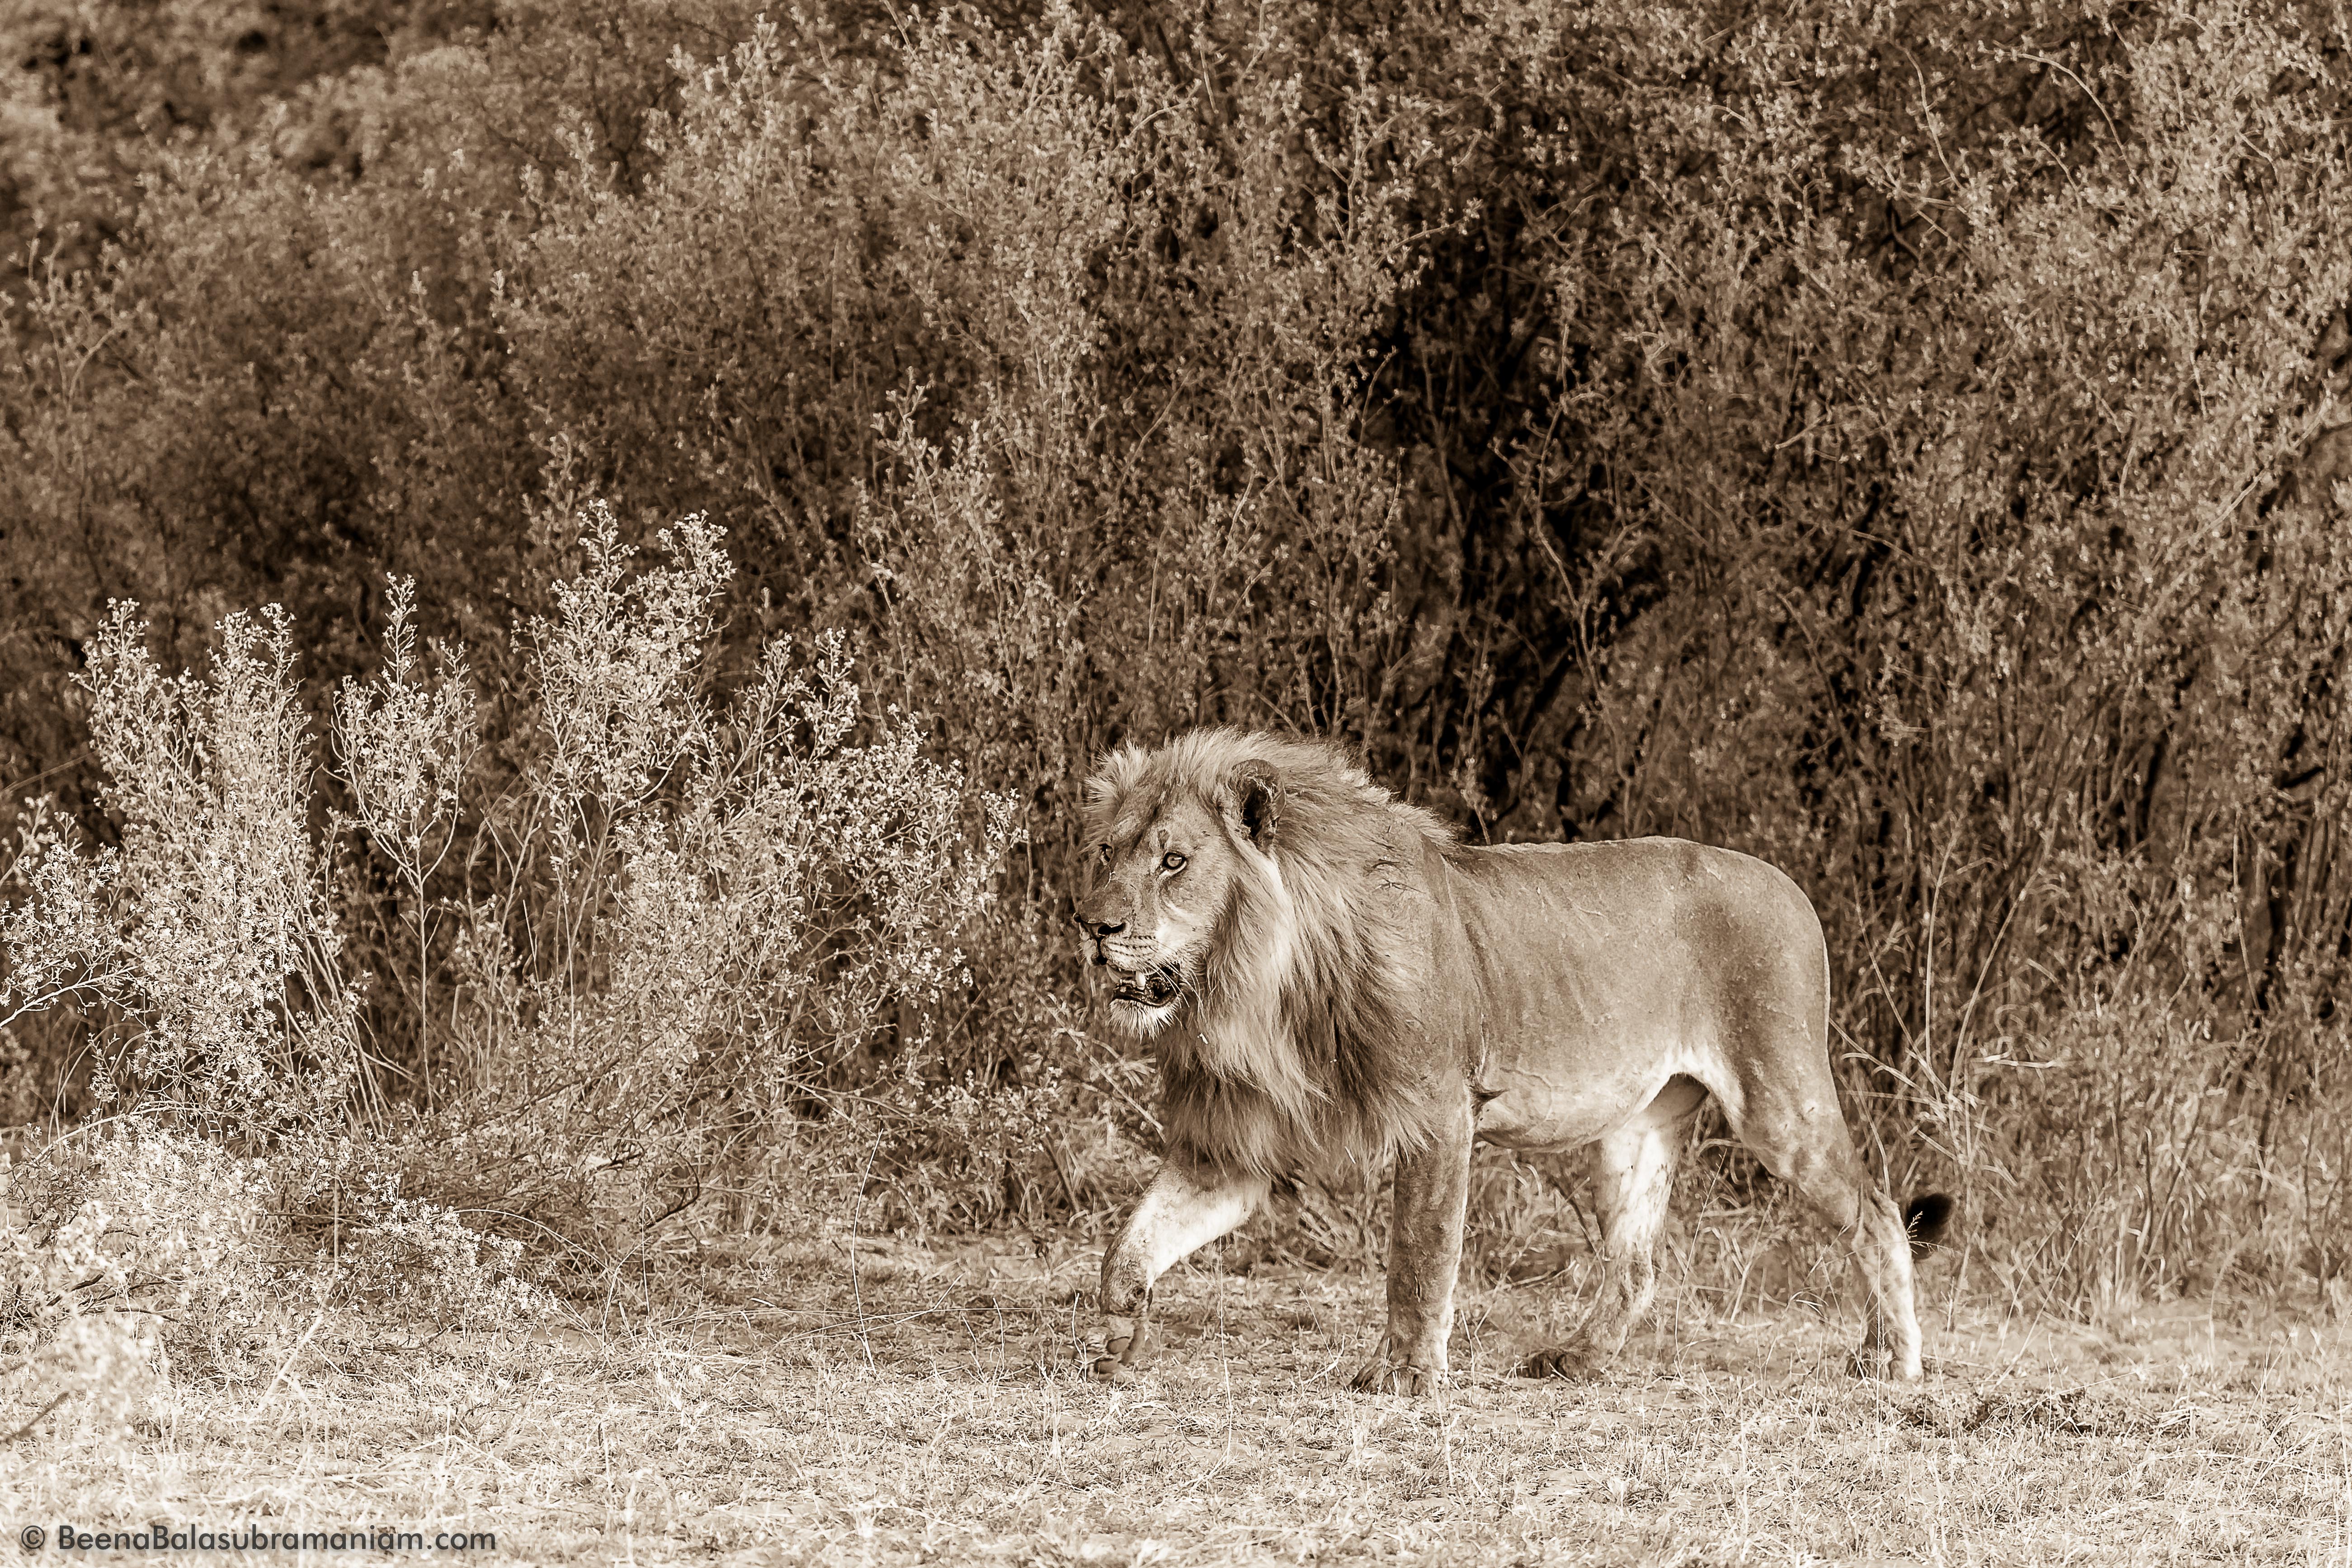 The Male Lion in sepia